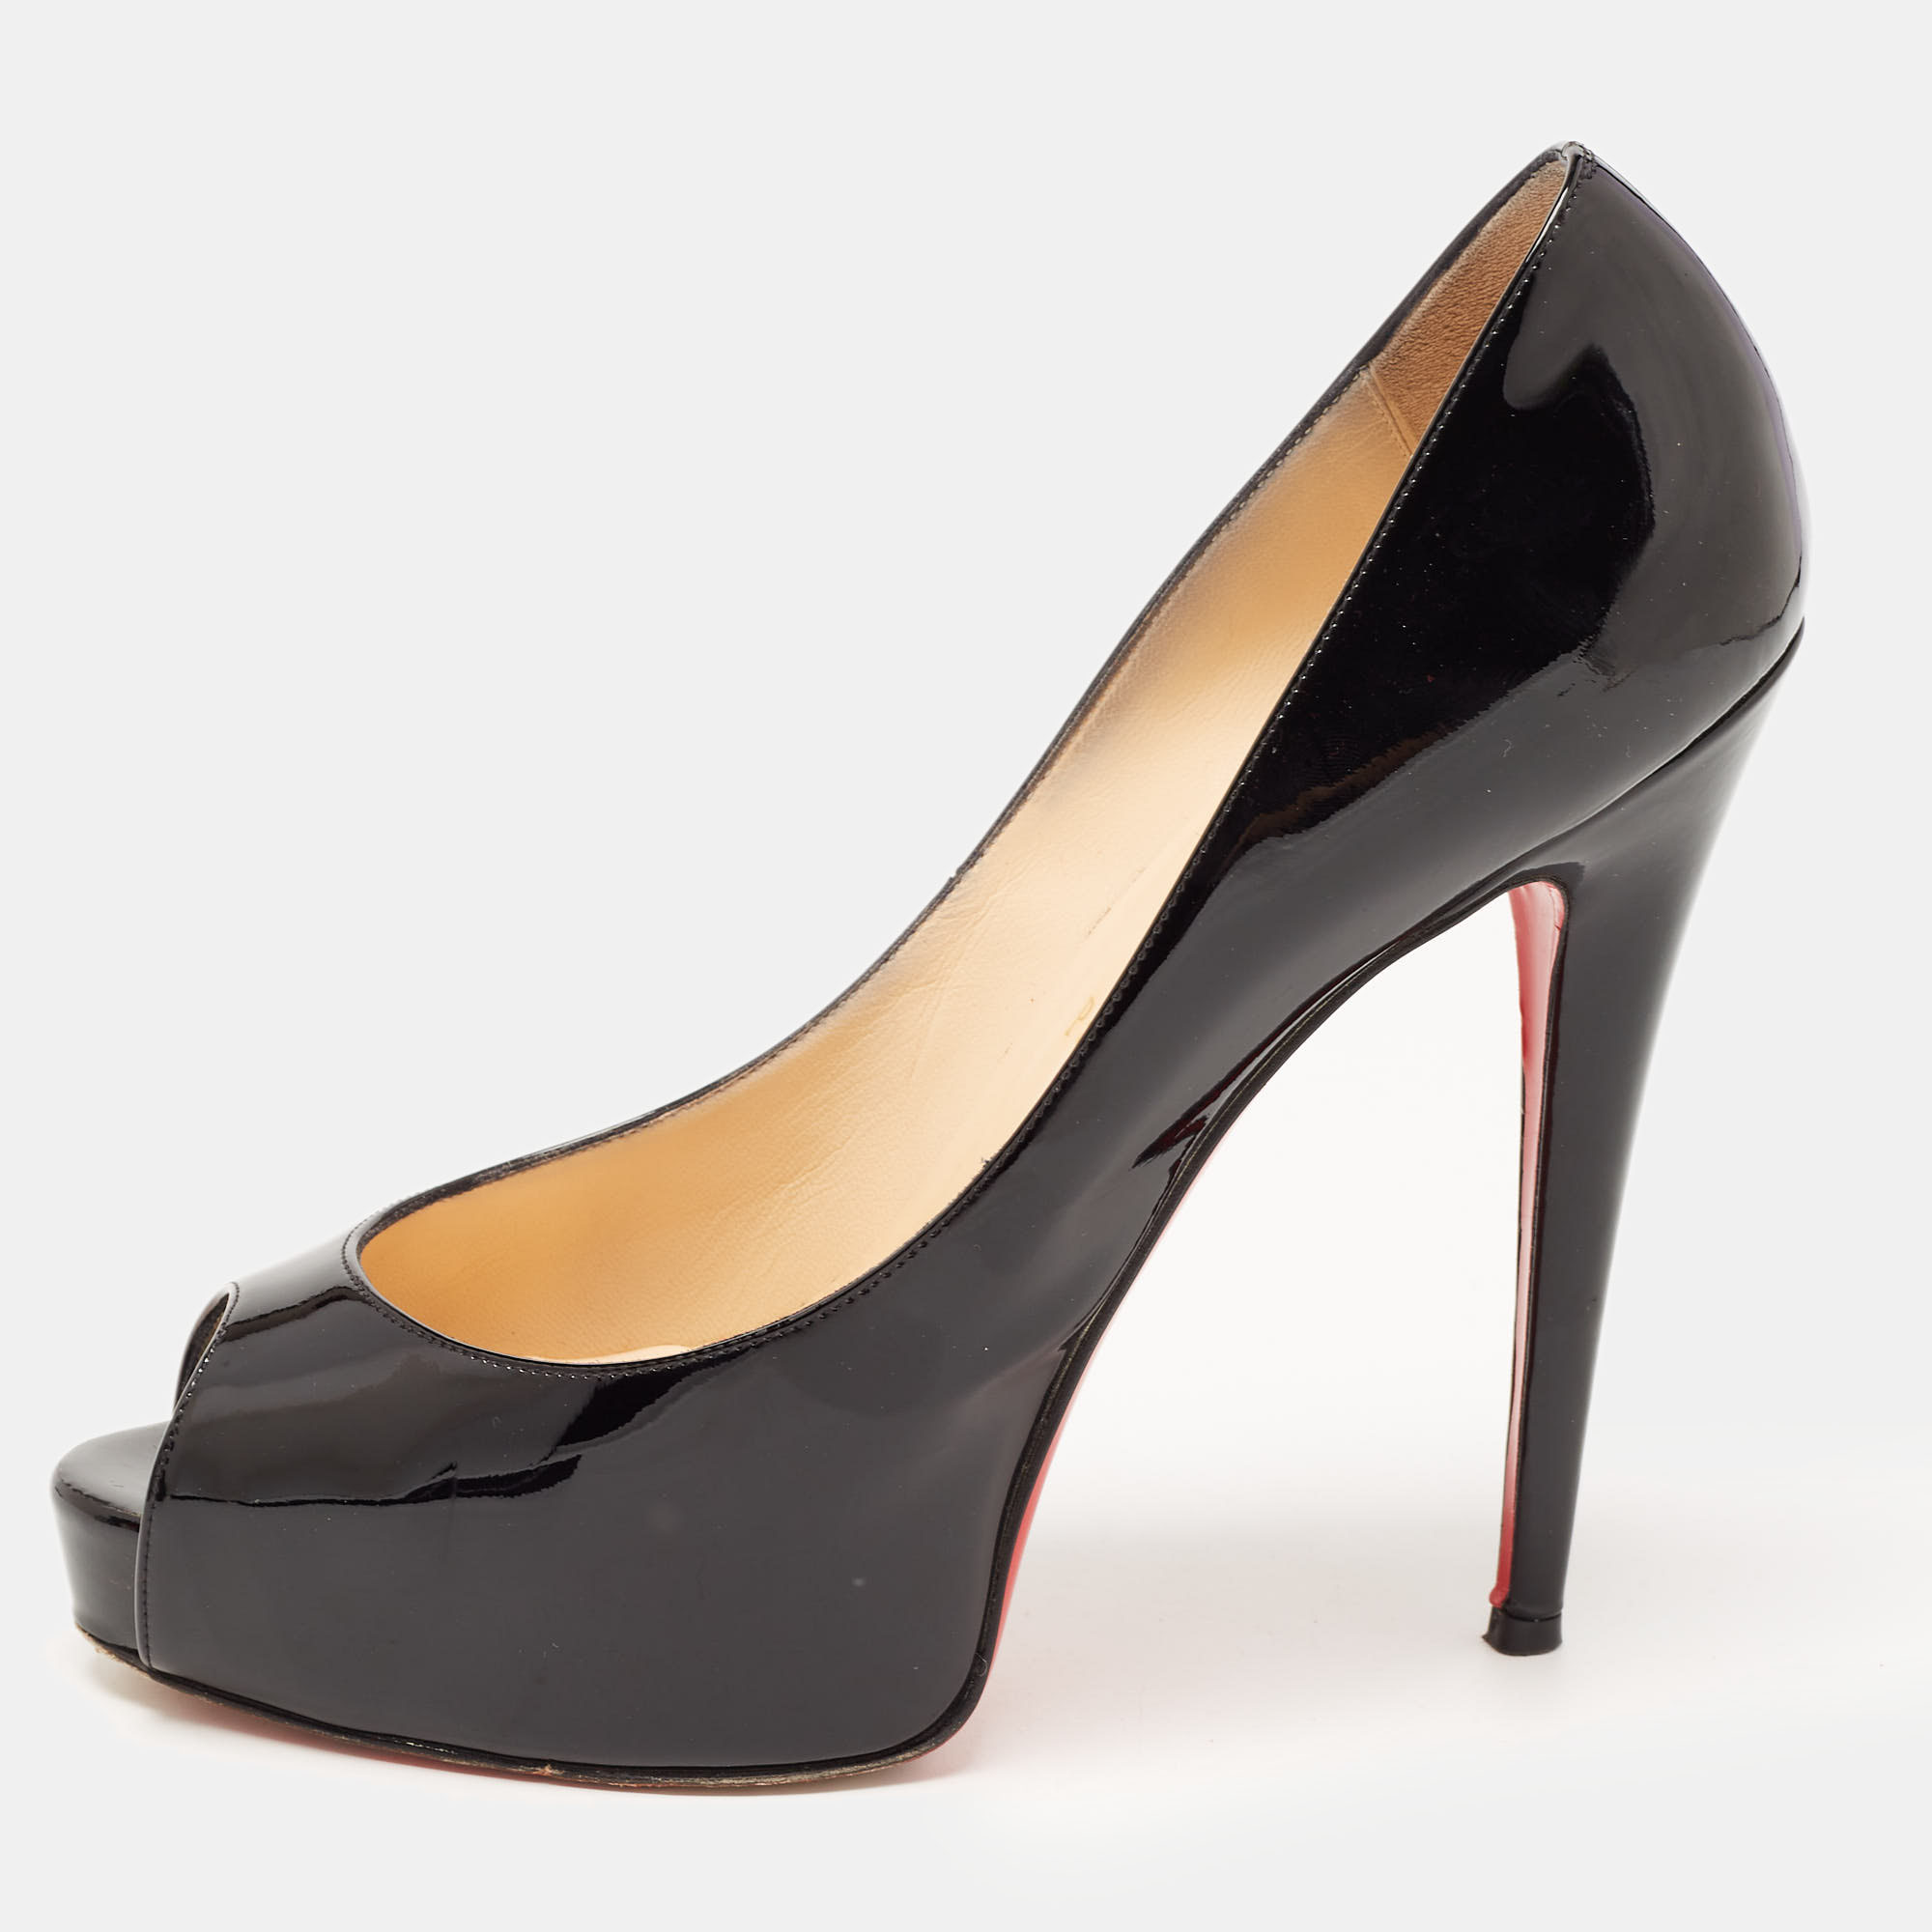 Pre-owned Christian Louboutin Black Patent Very Prive Pumps Size 40